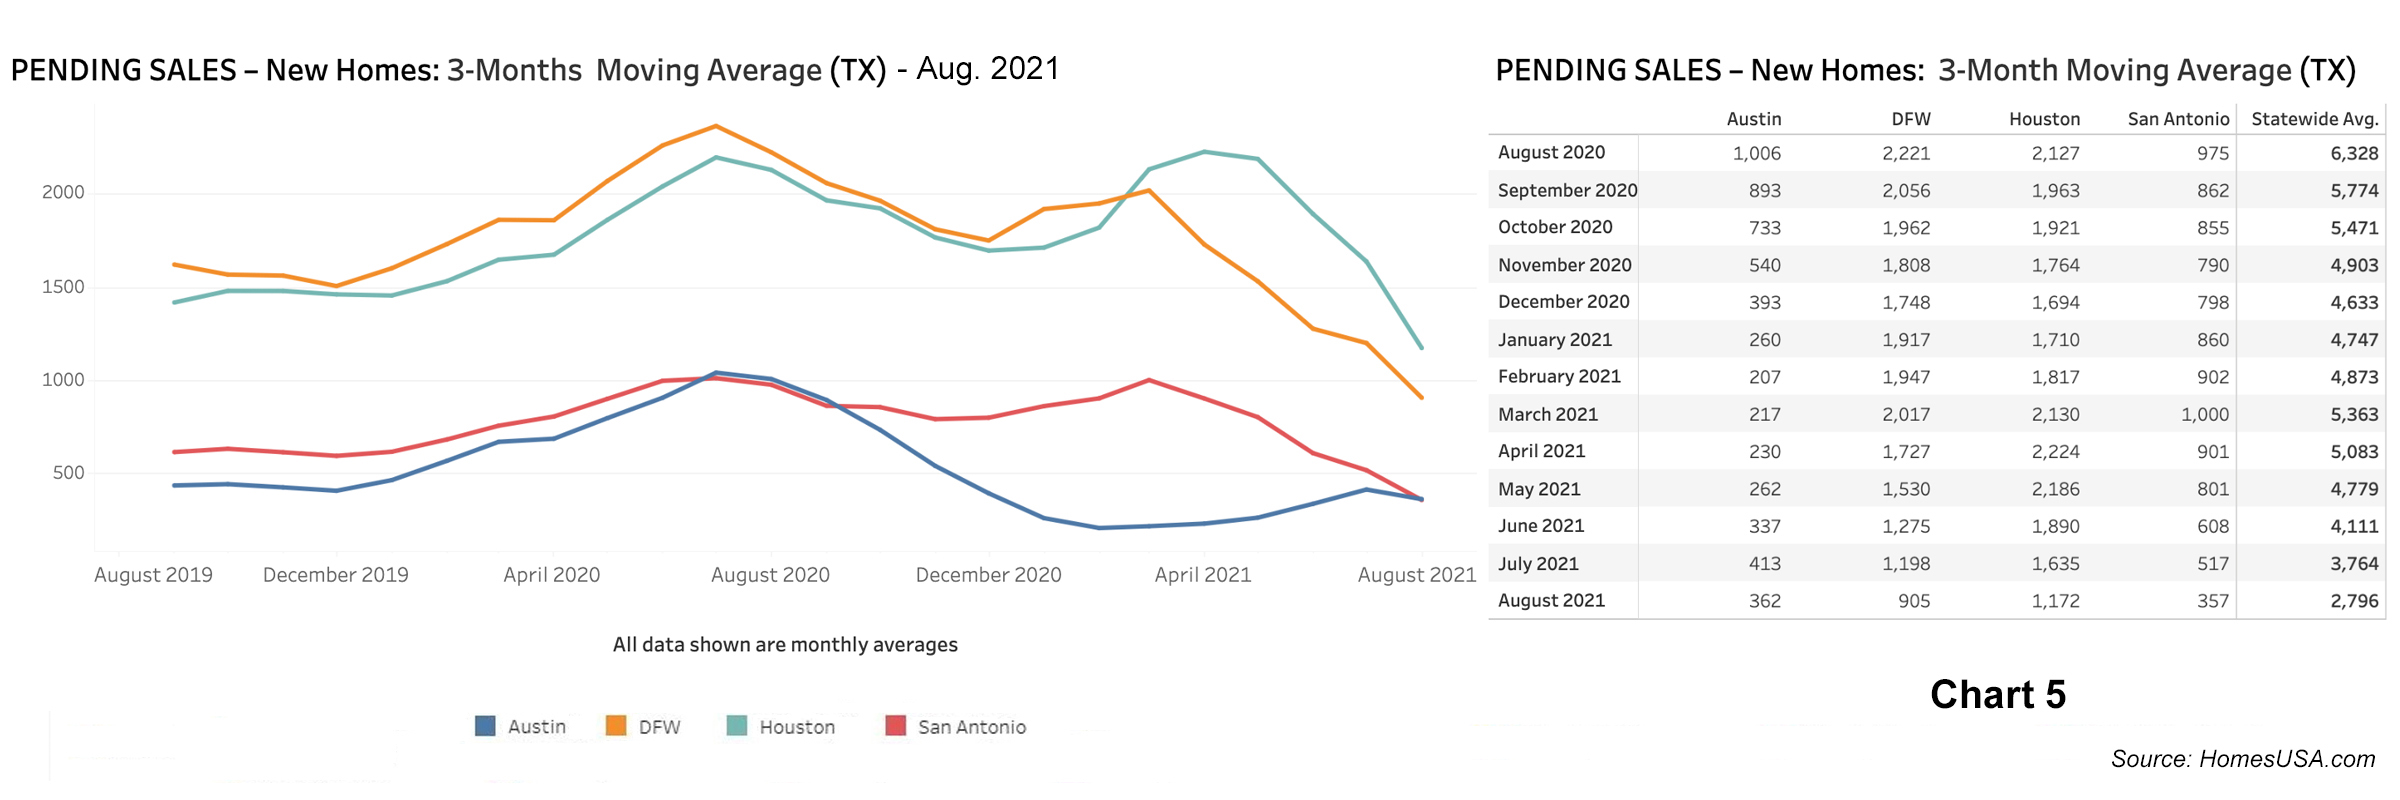 Chart 5: Texas Pending New Homes Sales - August 2021